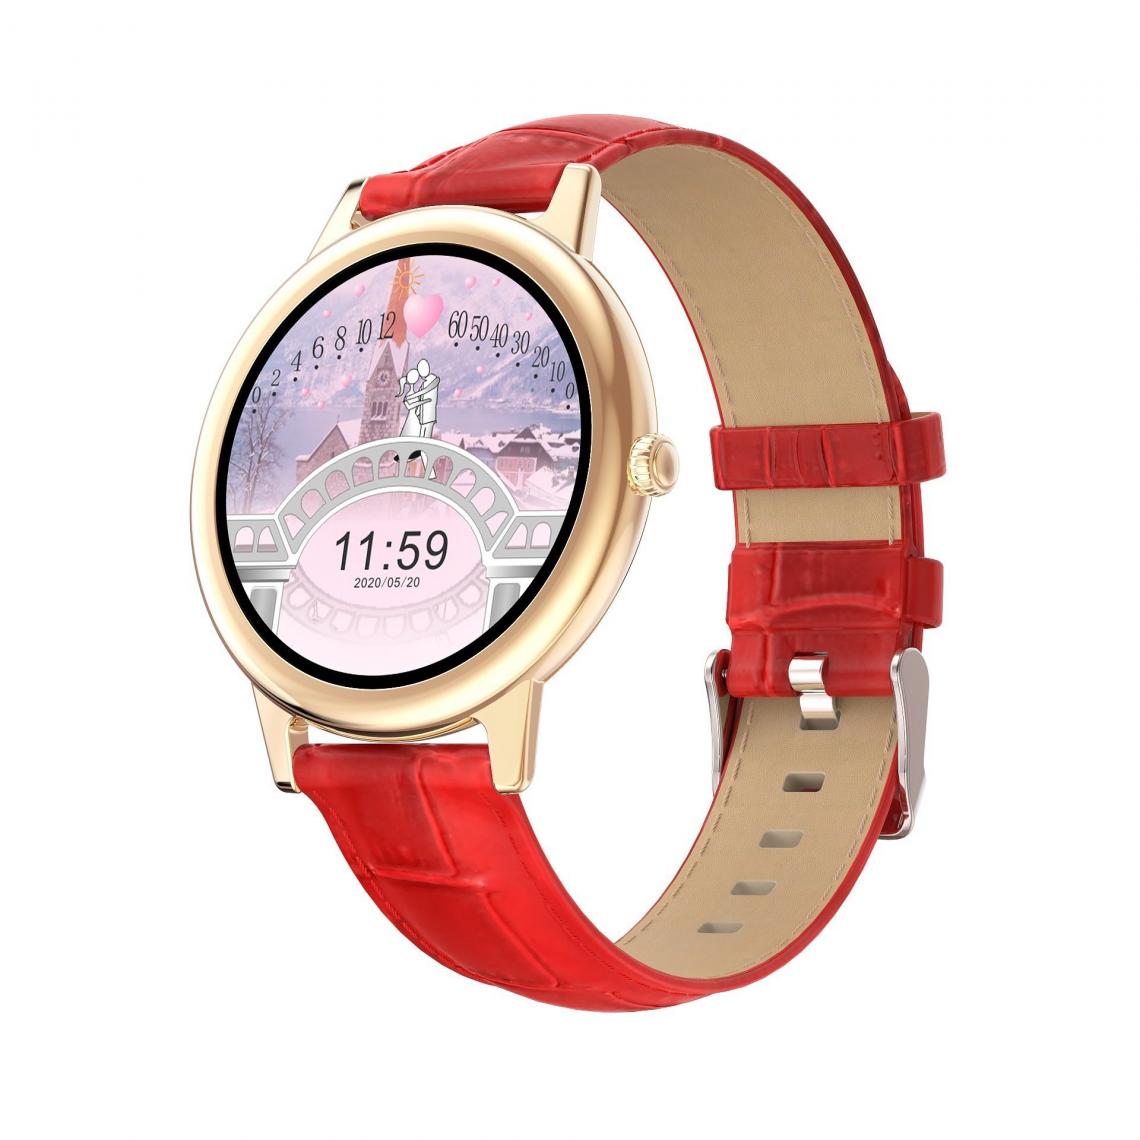 Chronotech Montres - Chronus Smart Watches for Men Women Full Touch Screen Ip67 Waterproof for Android and iOS Phones(Red) - Montre connectée